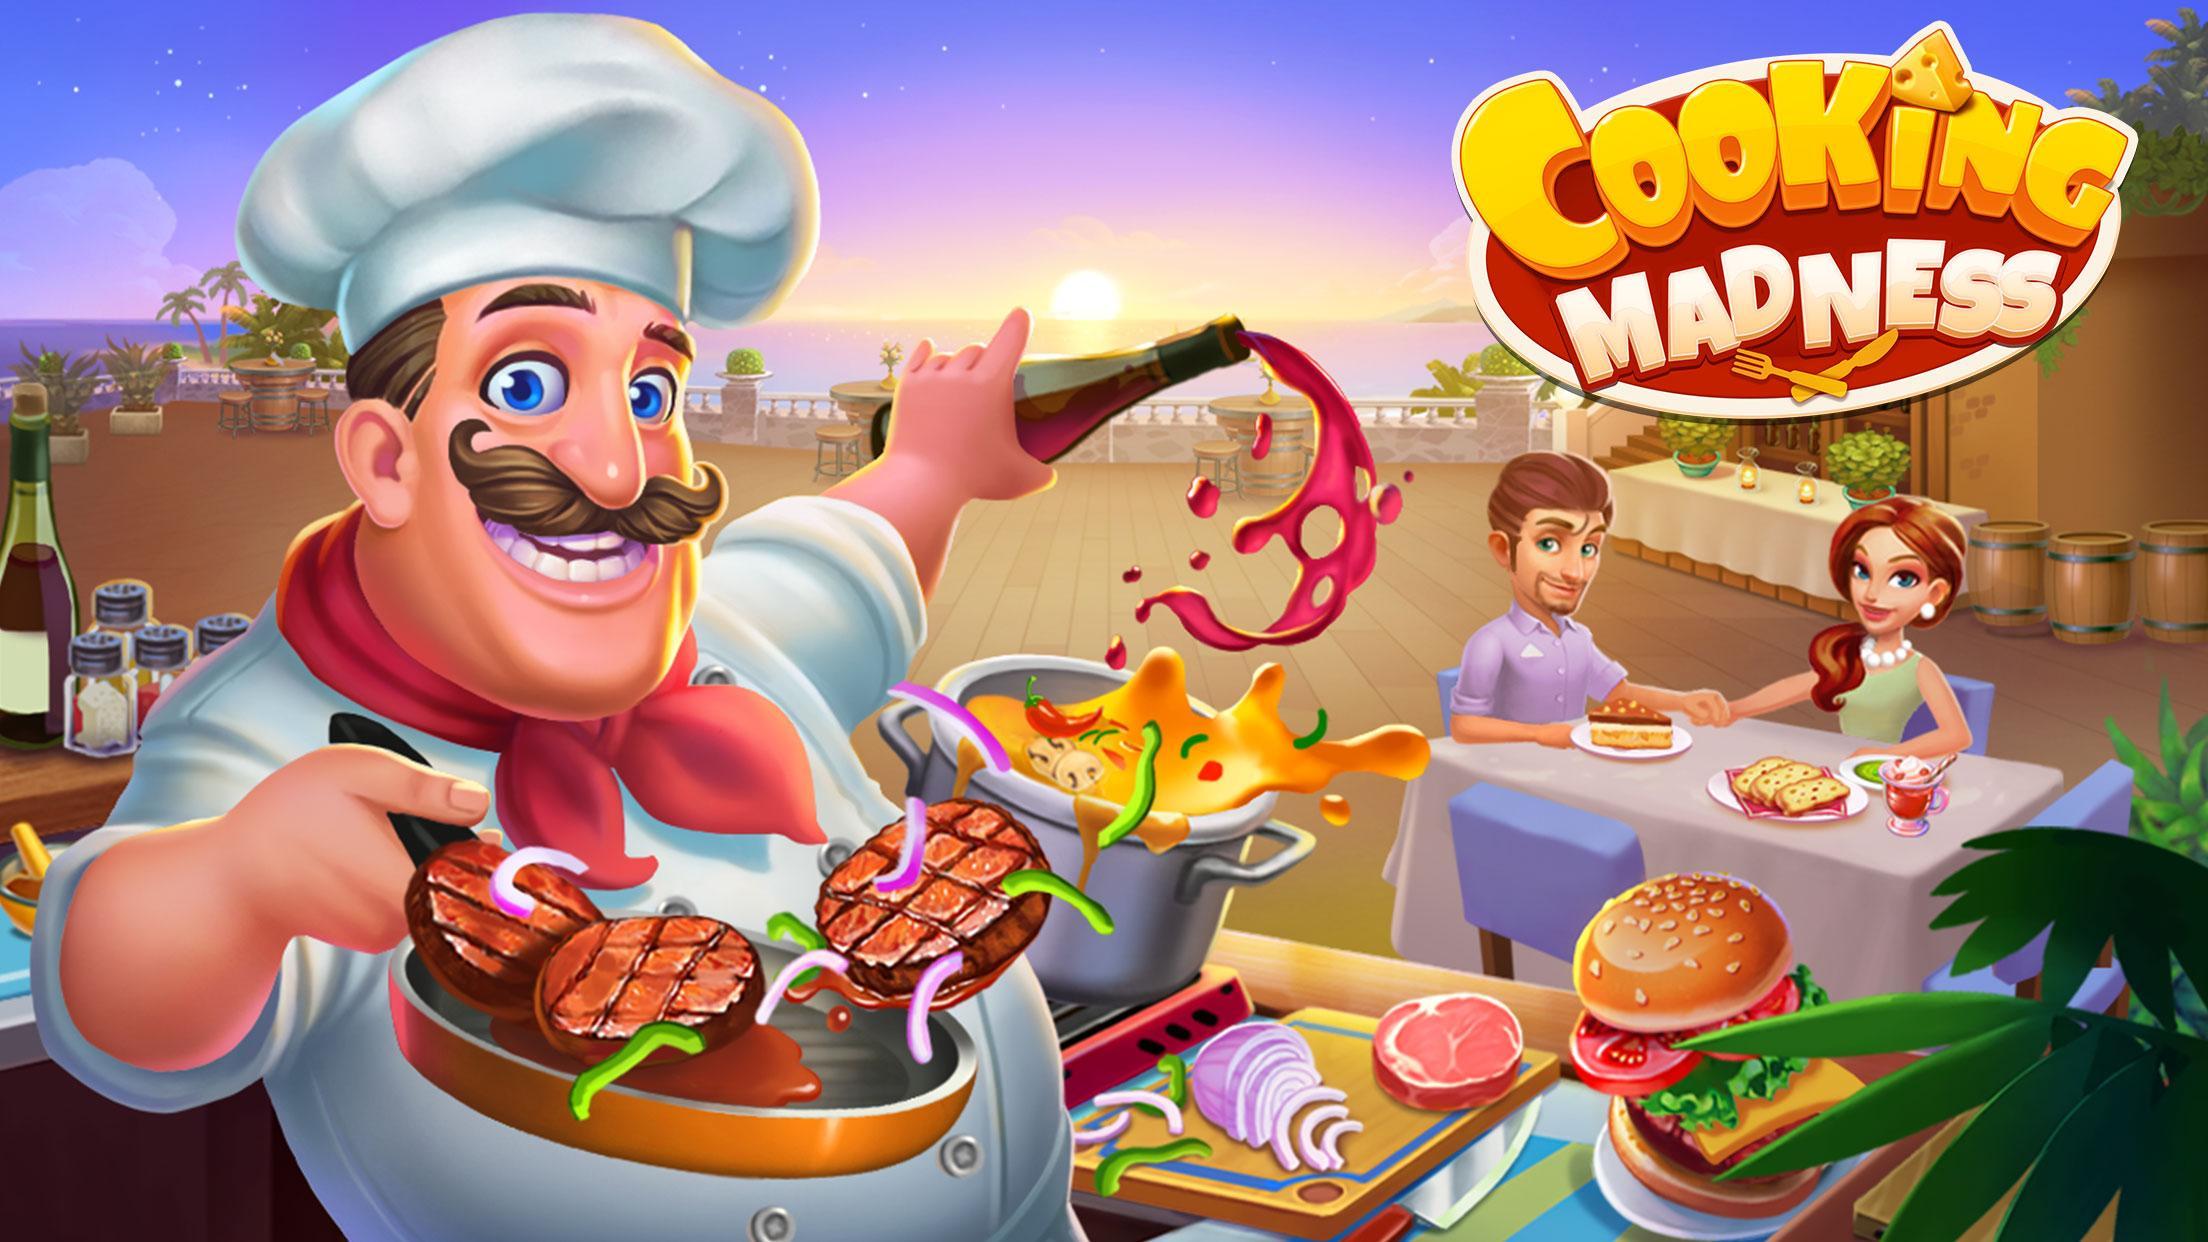 Cooking Madness - A Chef's Restaurant Games 1.7.2 Screenshot 17